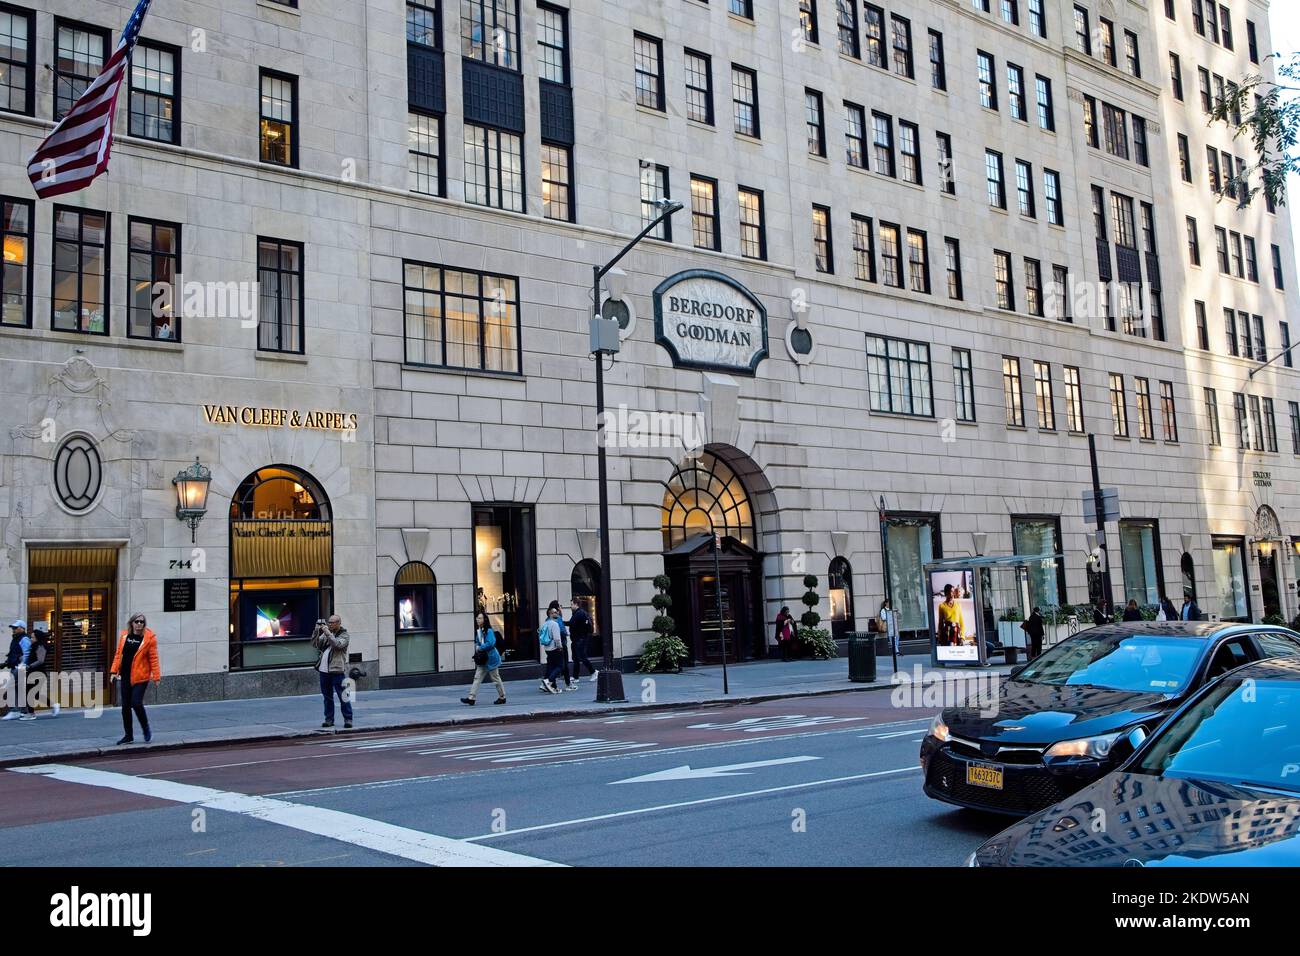 NEW YORK - MARCH 25, 2021: The Bergdorf Goodman Department Store In New  York. This Landmark Department Store Is Known For High-end Designer Clothes  & Shoes, Plus Premier Service Stock Photo, Picture